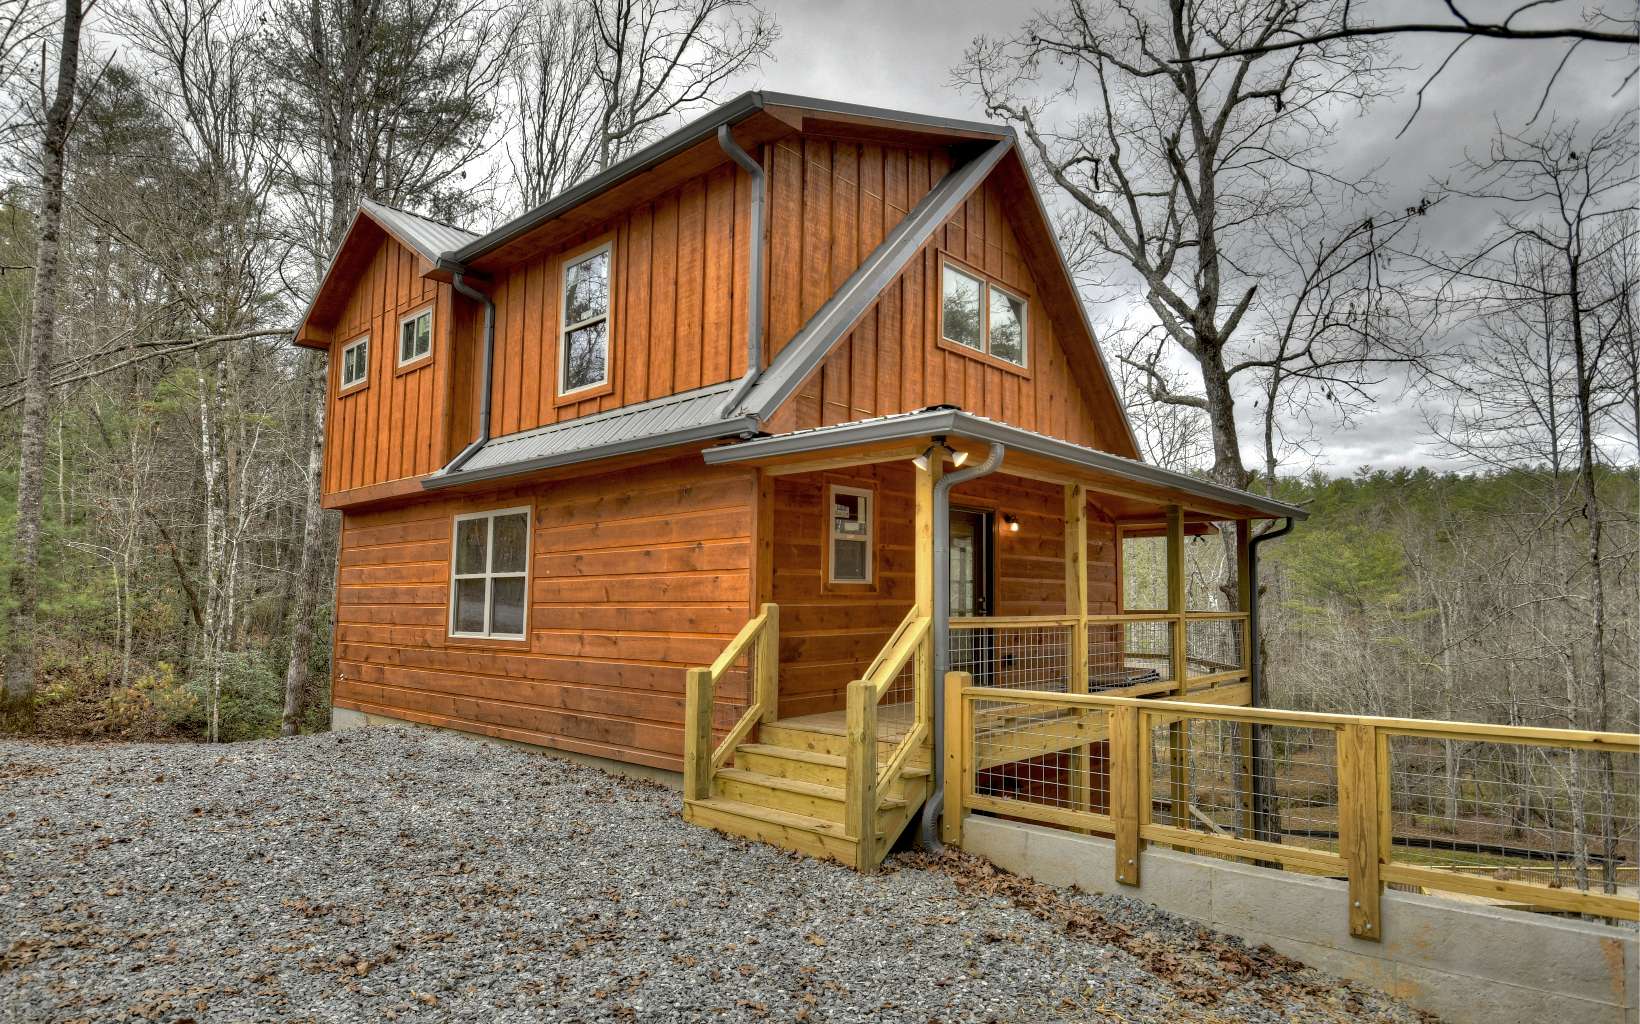 BRAND NEW CREEKFRONT CABIN ON OVER 3 ACRES READY TO MOVE IN!! This 3BR/3BA Cabin has 350' of Creek Frontage & Close Up Mountain Views! This Rustic Cabin Features All Wood Interior, Floor to Ceiling Fireplace, Oak Cabinets, Hardwood Floors, Tile Showers, Two Full Length Back Porches and a Private Balcony off Master, Beautiful Finishes Throughout! Great Layout for Full Time Living or Vacation Rental~ Open Concept Living/Dining/Kitchen, a Bedroom and Bathroom on Each of the Three Levels, Bonus Loft on Upper Level, and Second Living Area in the Finished Terrace Level. Cabin is Situated on a Sprawling 3.07 Acre Lot with Mountain Views and Trout Creek Frontage~ The Lot has a True Park Like Setting~ Surrounded by Woods, the Terrain is Rolling down to the Large, Completely Level and Usable Area Creekside featuring your own Private Oversized Party Deck for entertaining Creekside~ Possibilities are Endless! Located in a Beautiful Area that has an abundance of Wildlife, Area is Surrounded by USFS, and is the Gateway to Miles of Hiking & Biking!